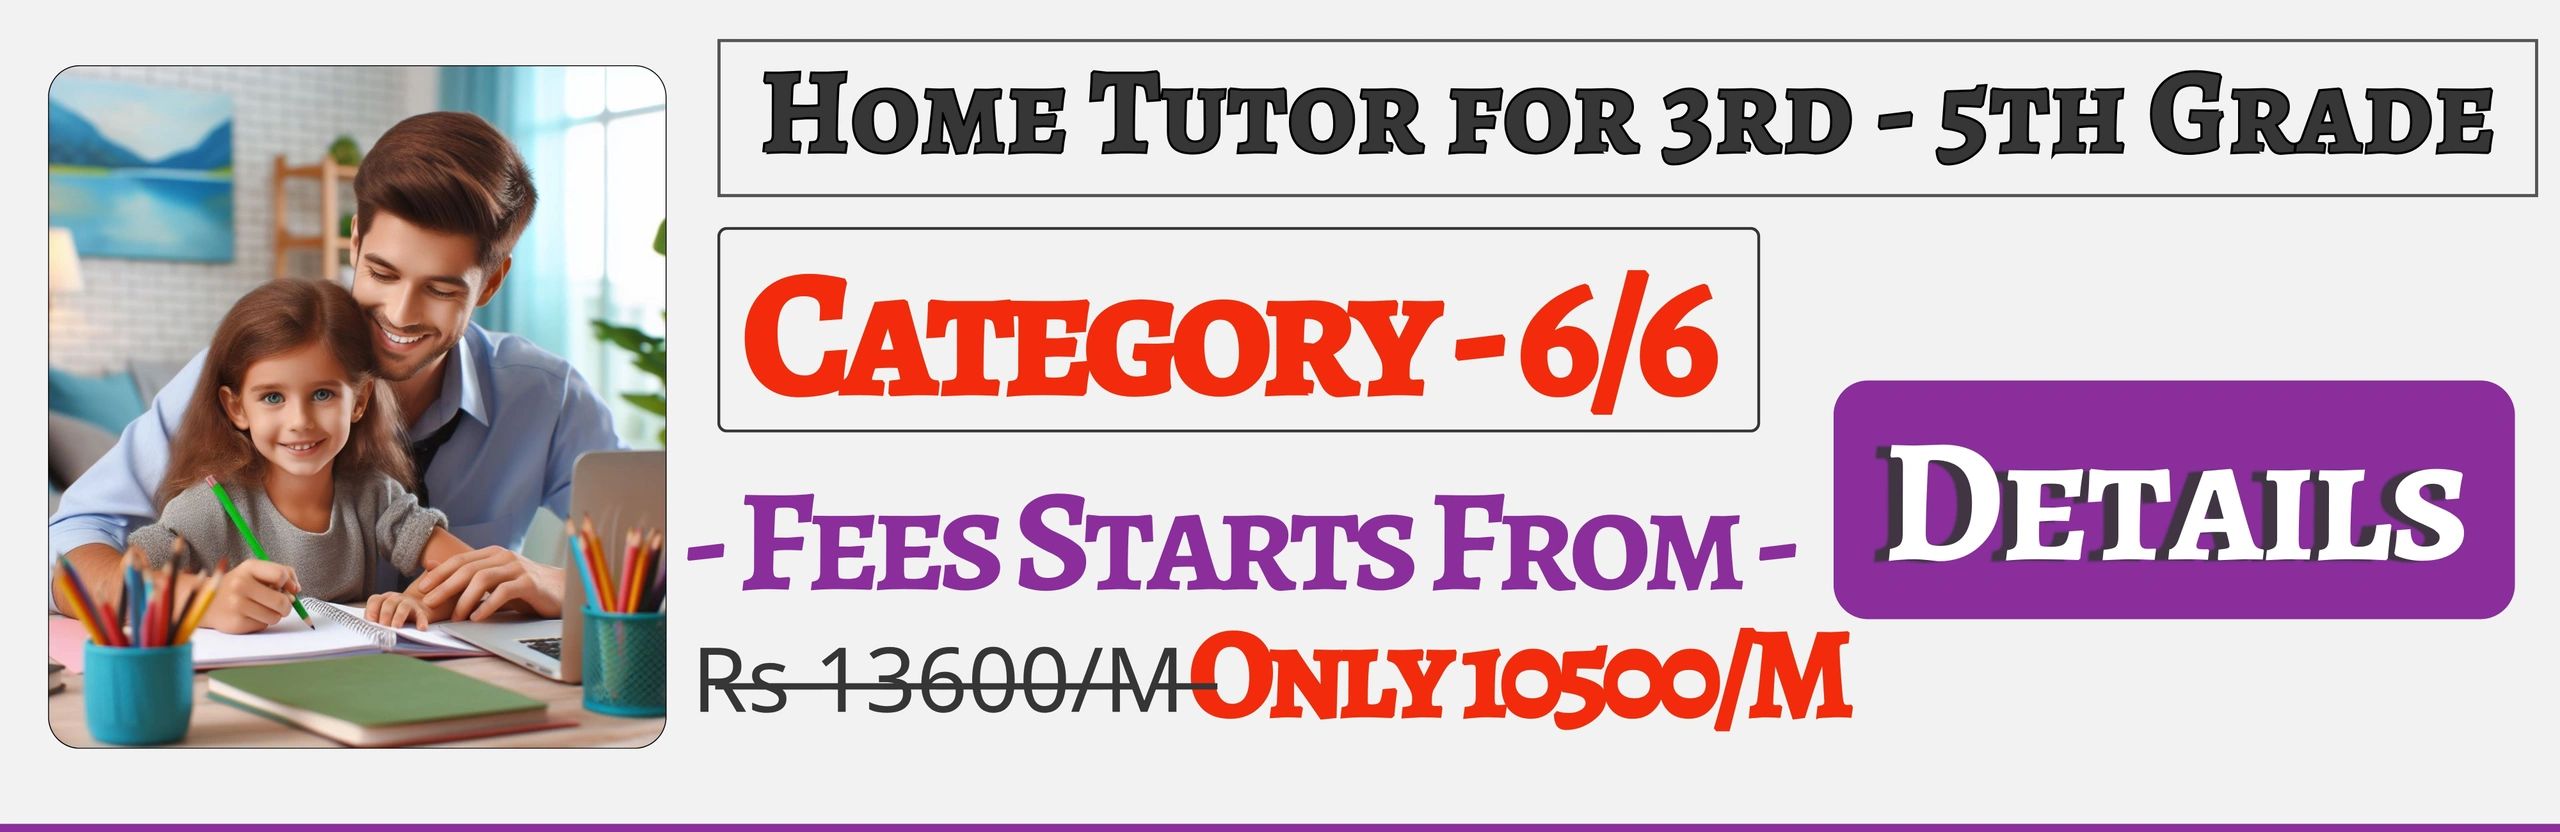 Book Best Home Tuition Tutors For 3rd , 4th & 5th In Jaipur , Fees Only 10500/M